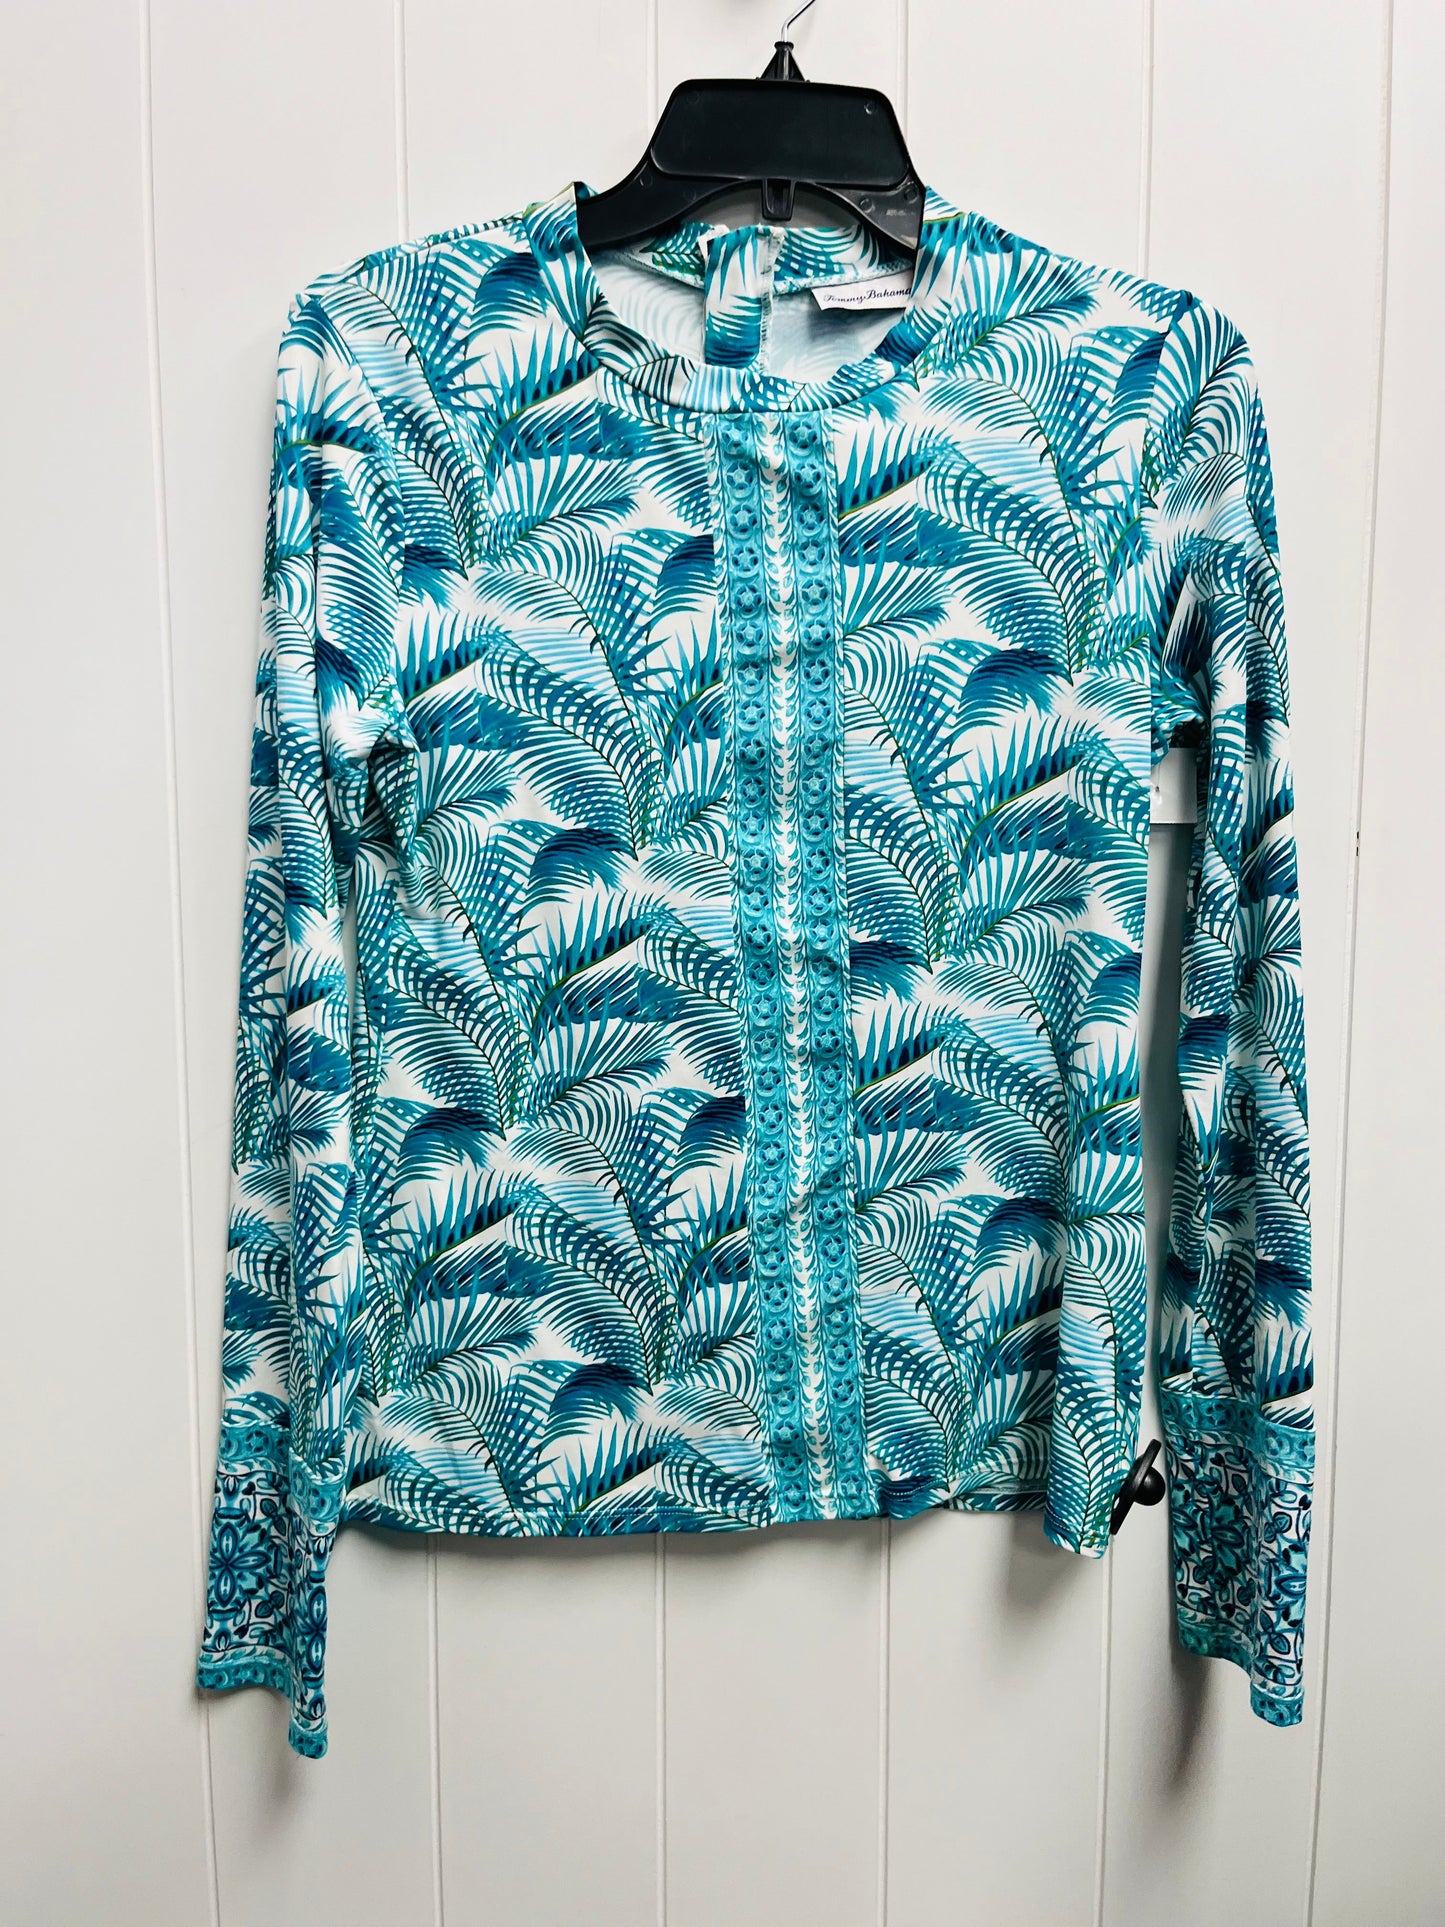 Teal Top Long Sleeve Tommy Bahama, Size S